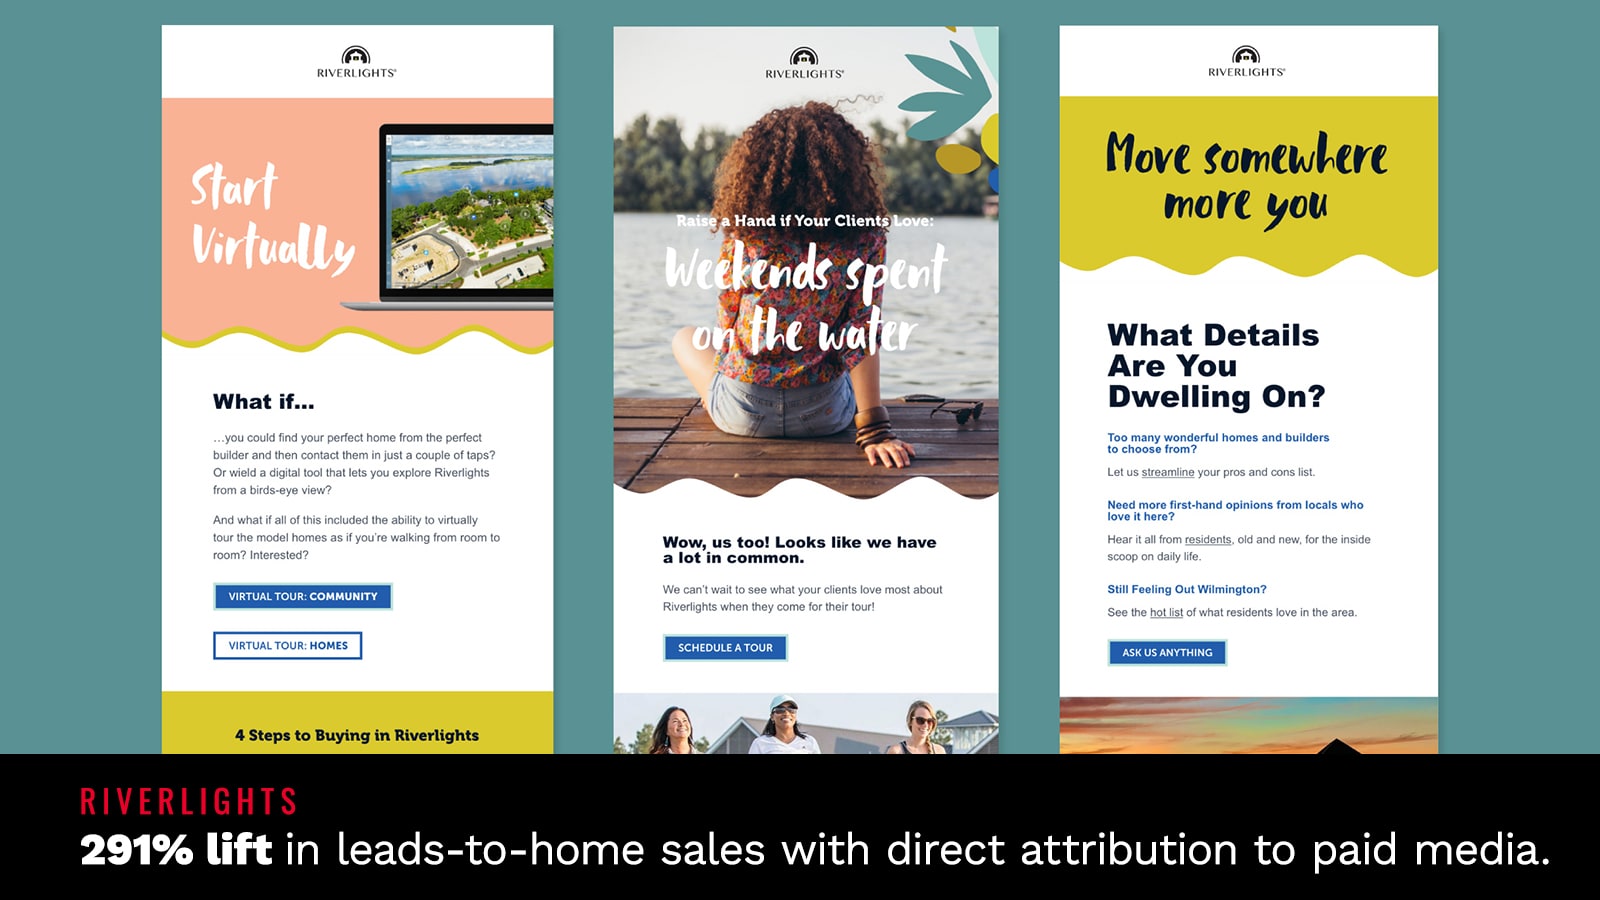 Riverlights: 291% lift in leads-to-home sales with direct attribution to paid media.